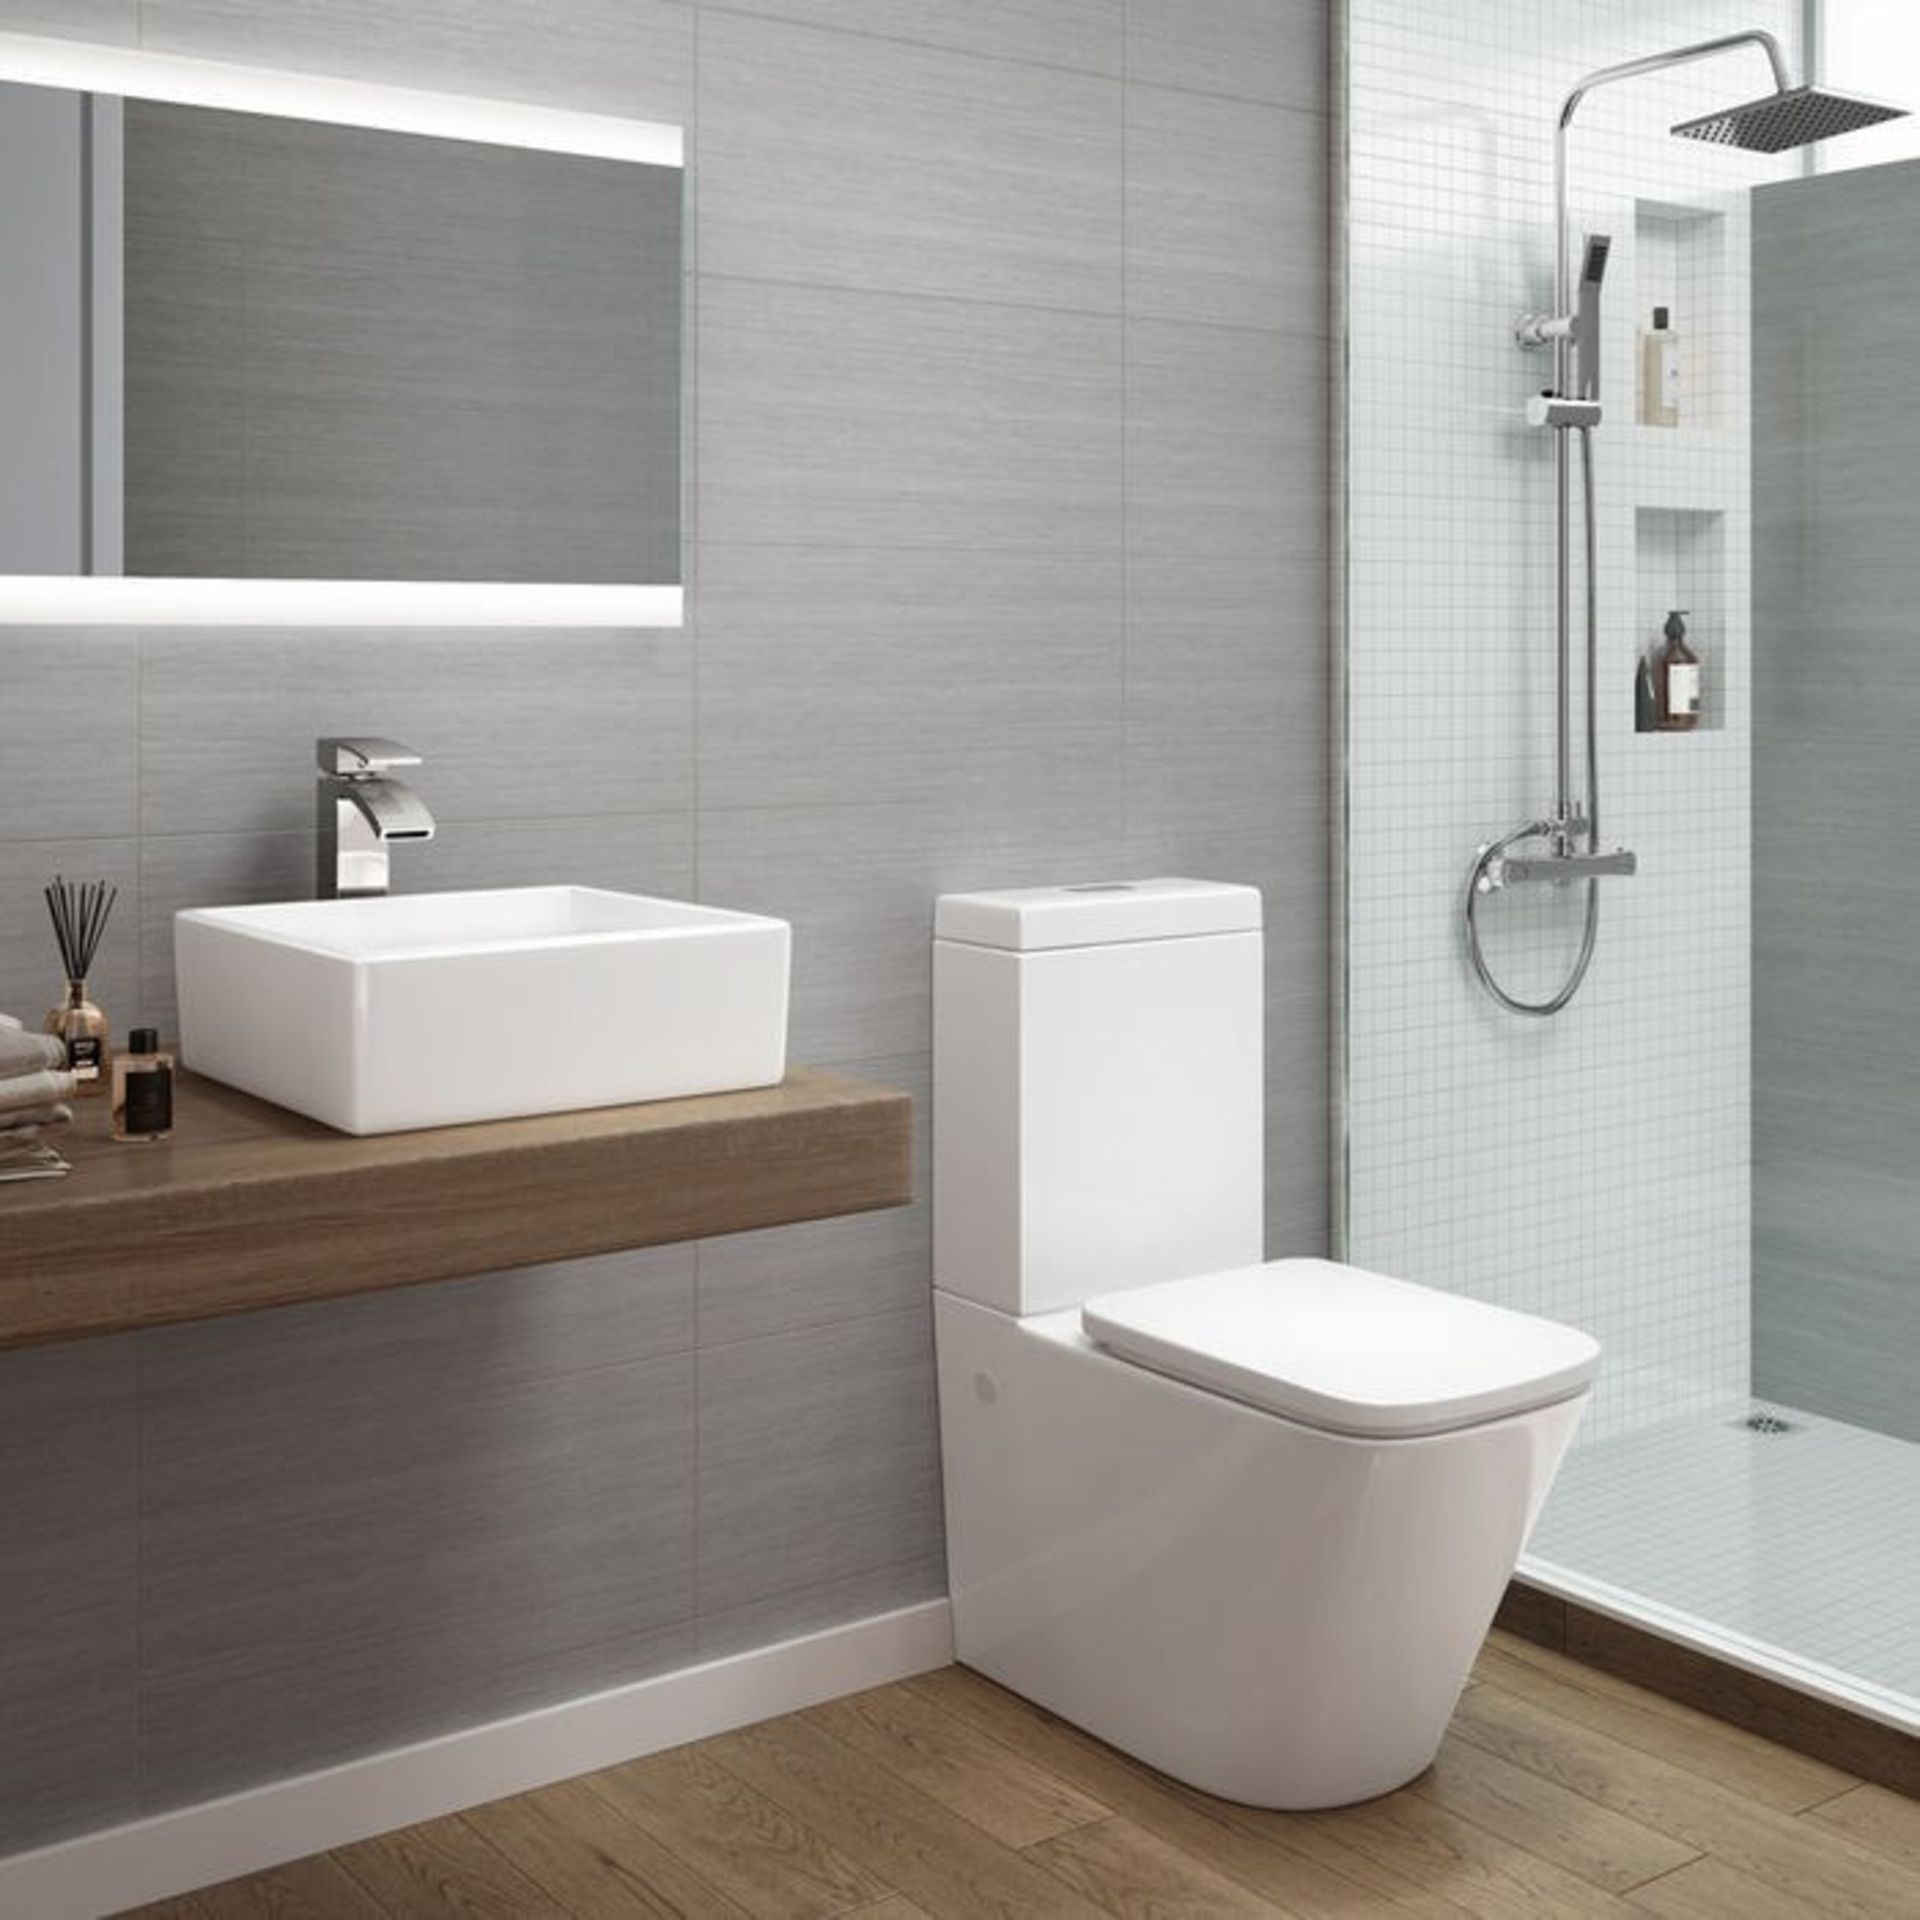 Florence Close Coupled Toilet & Cistern inc Soft Close Seat. 640CCT. Contemporary design finis... - Image 2 of 3